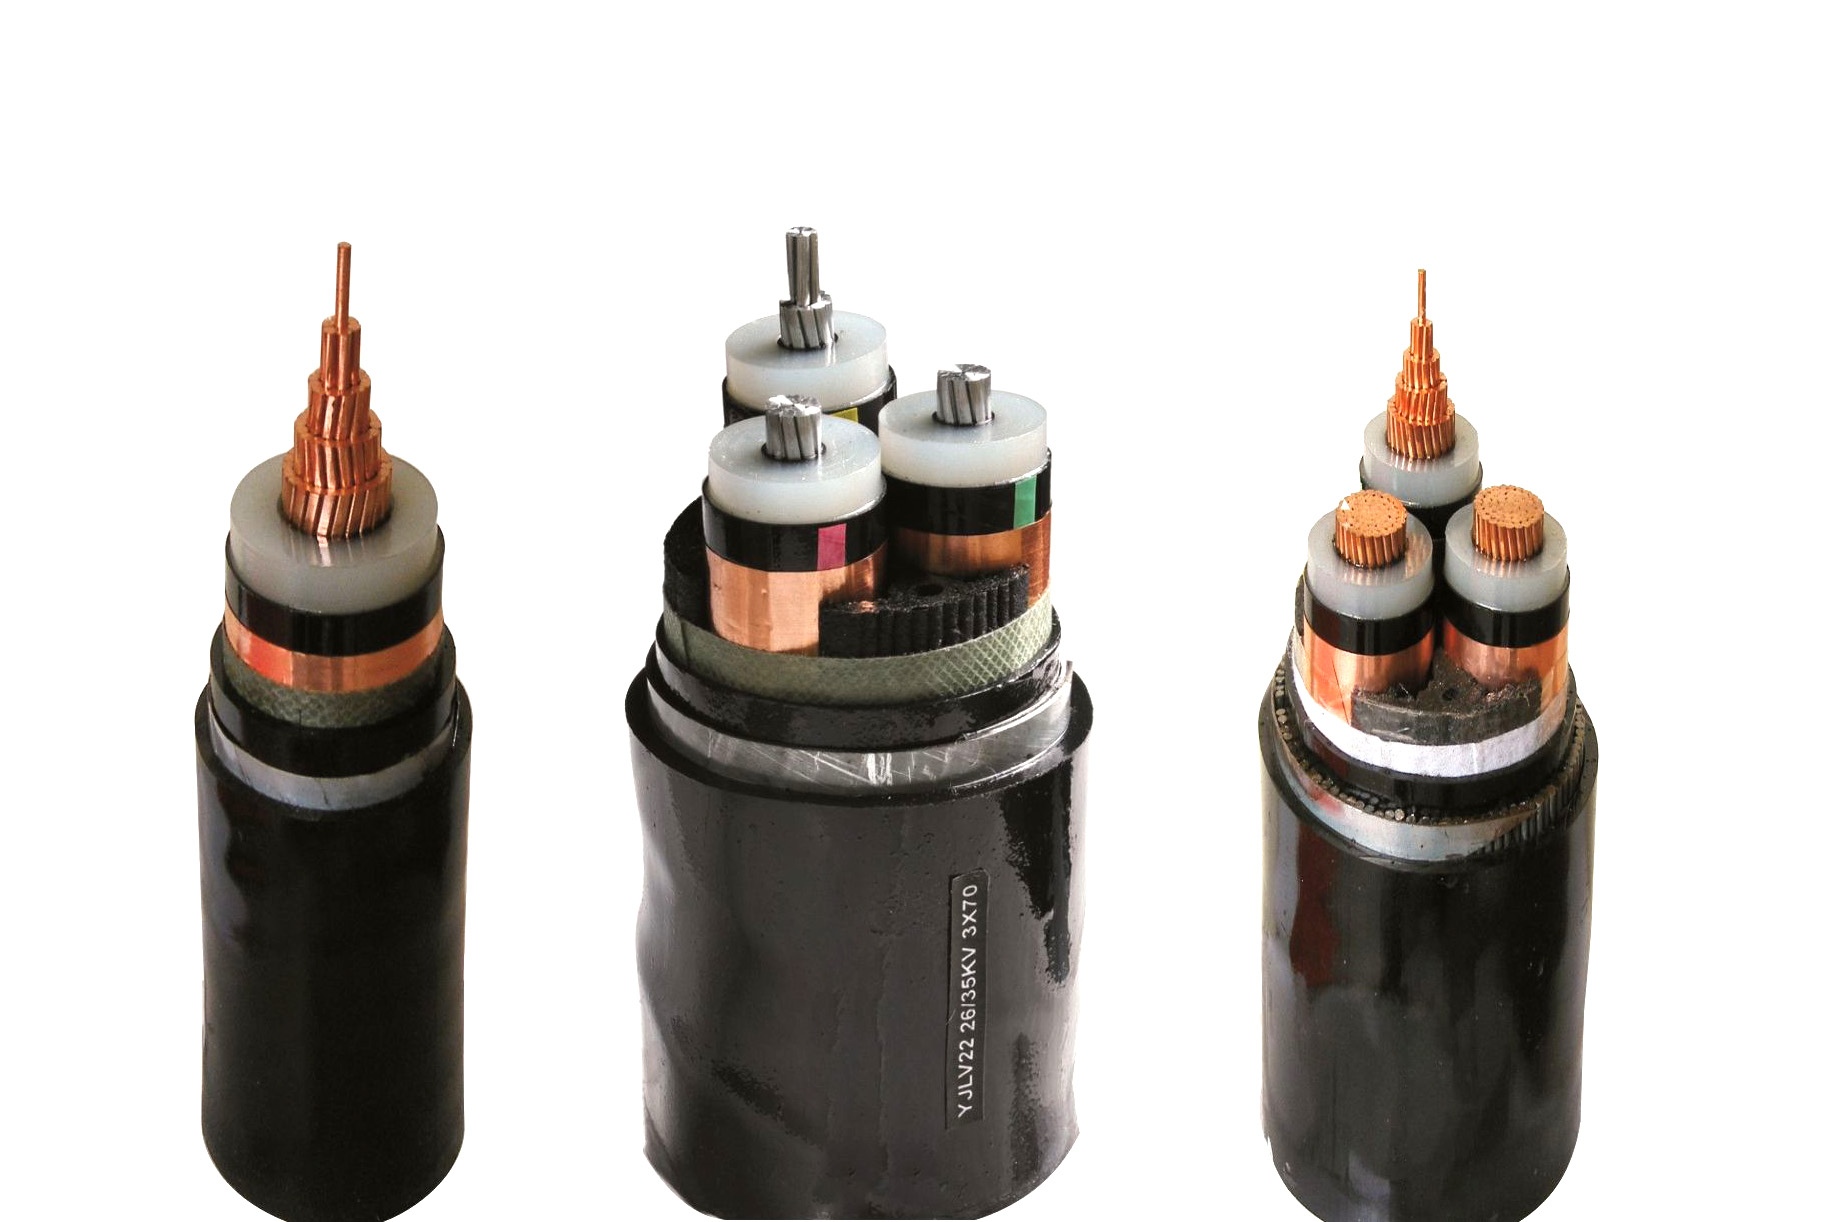 Choosing the right type of industrial cable